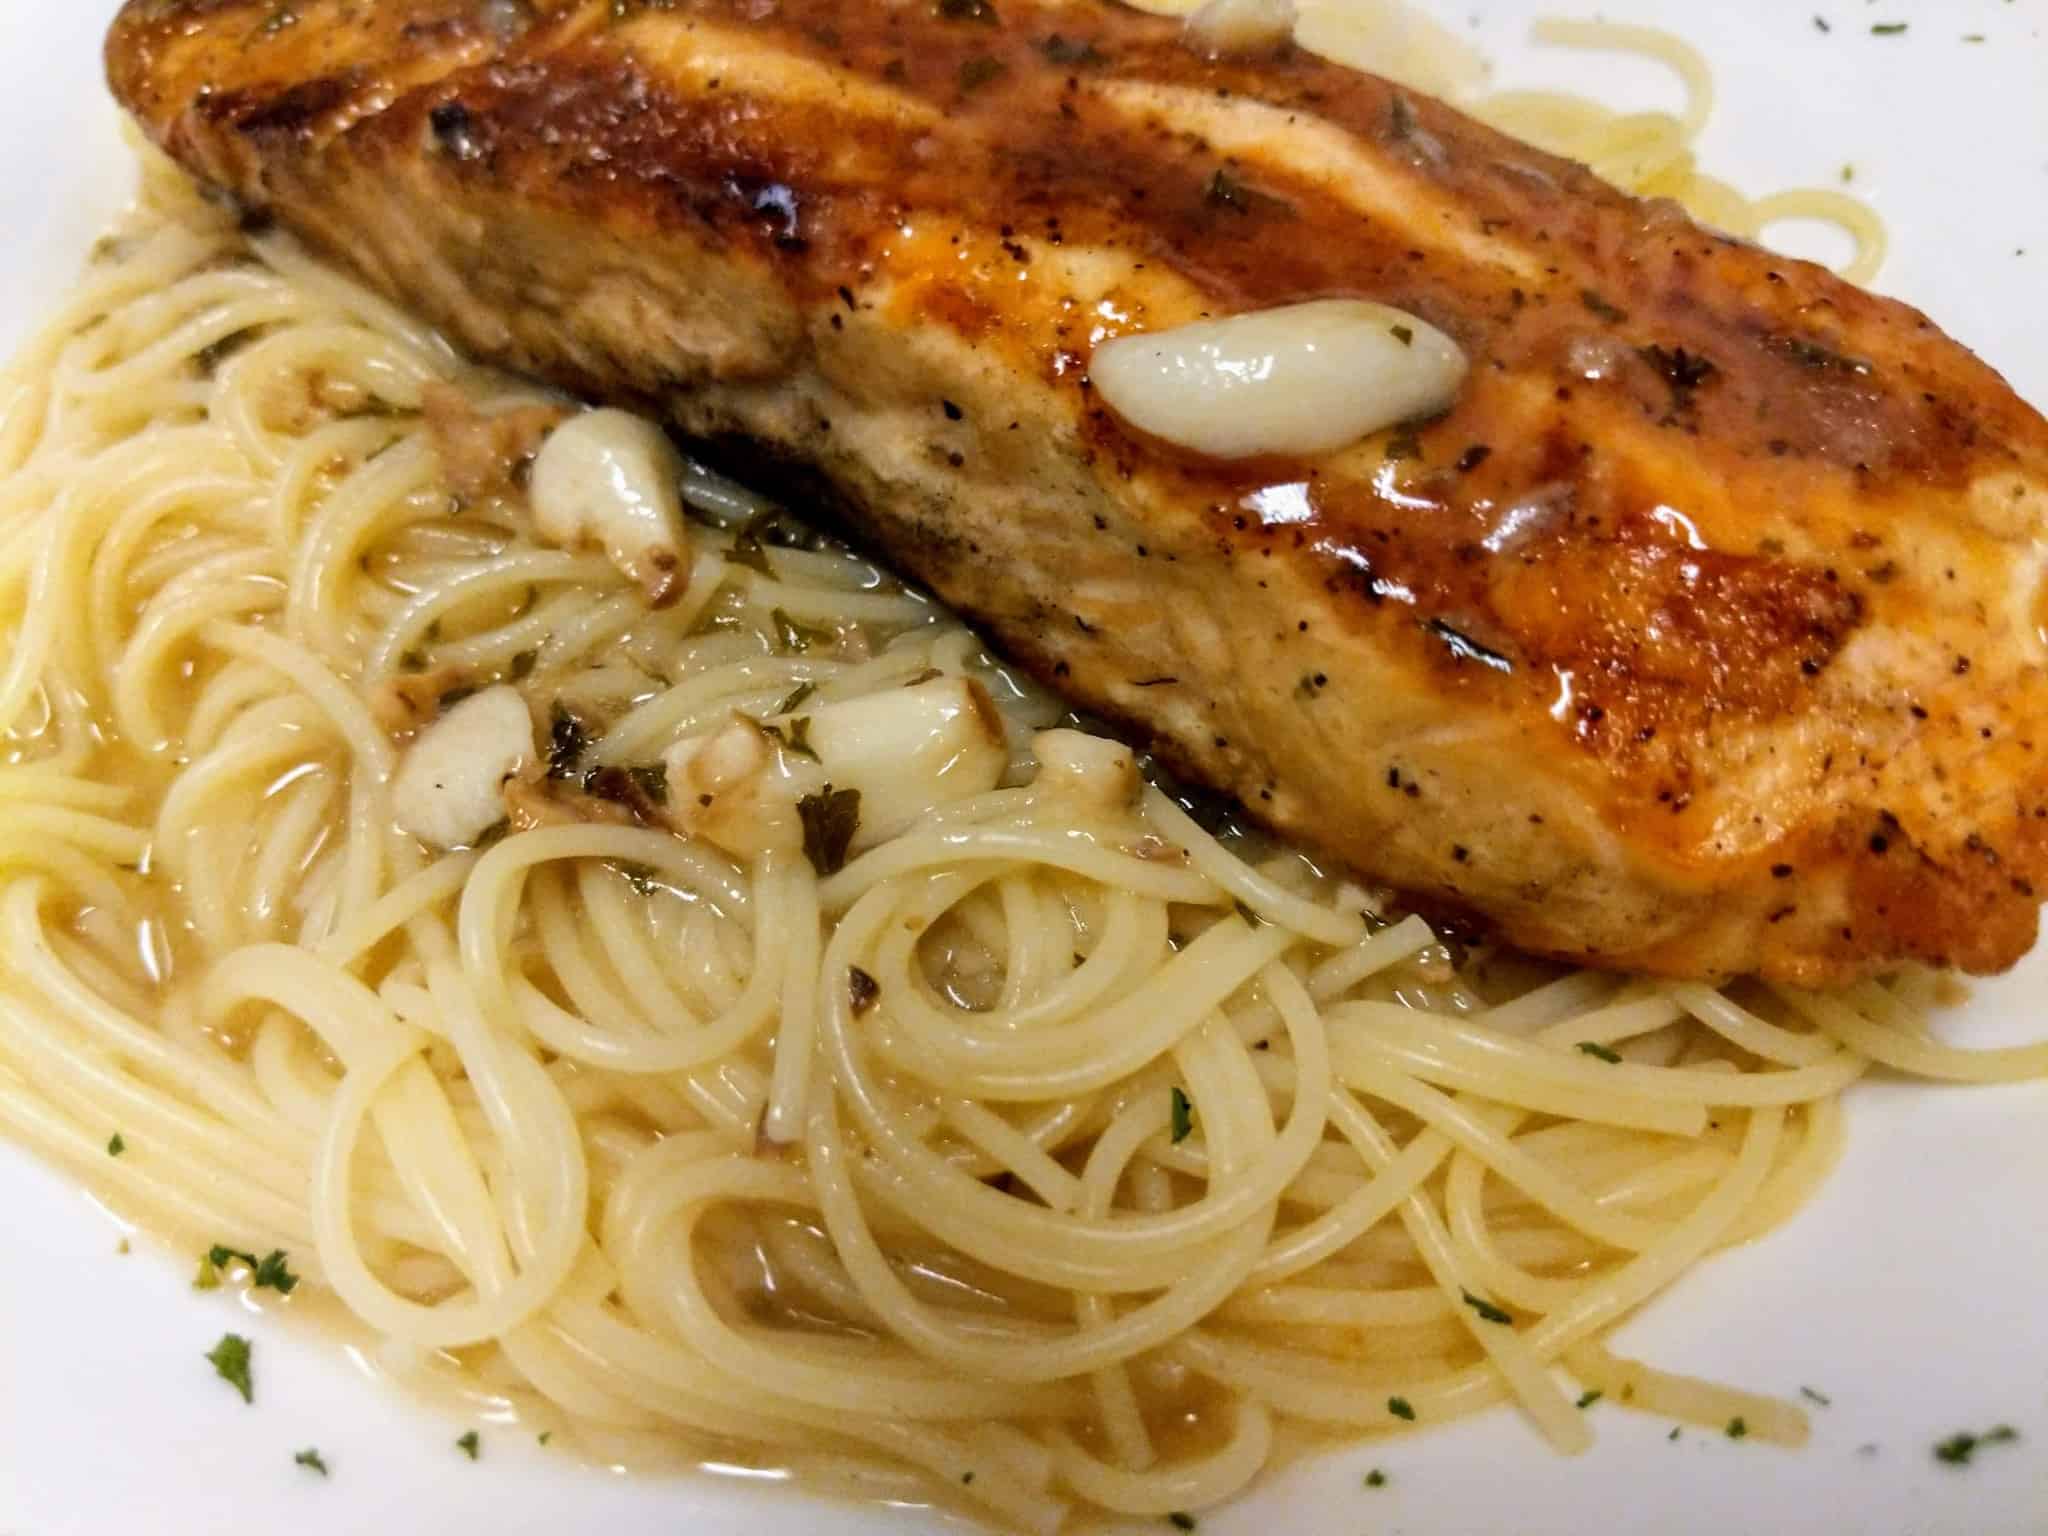 A plate of salmon and spaghetti on a white plate.